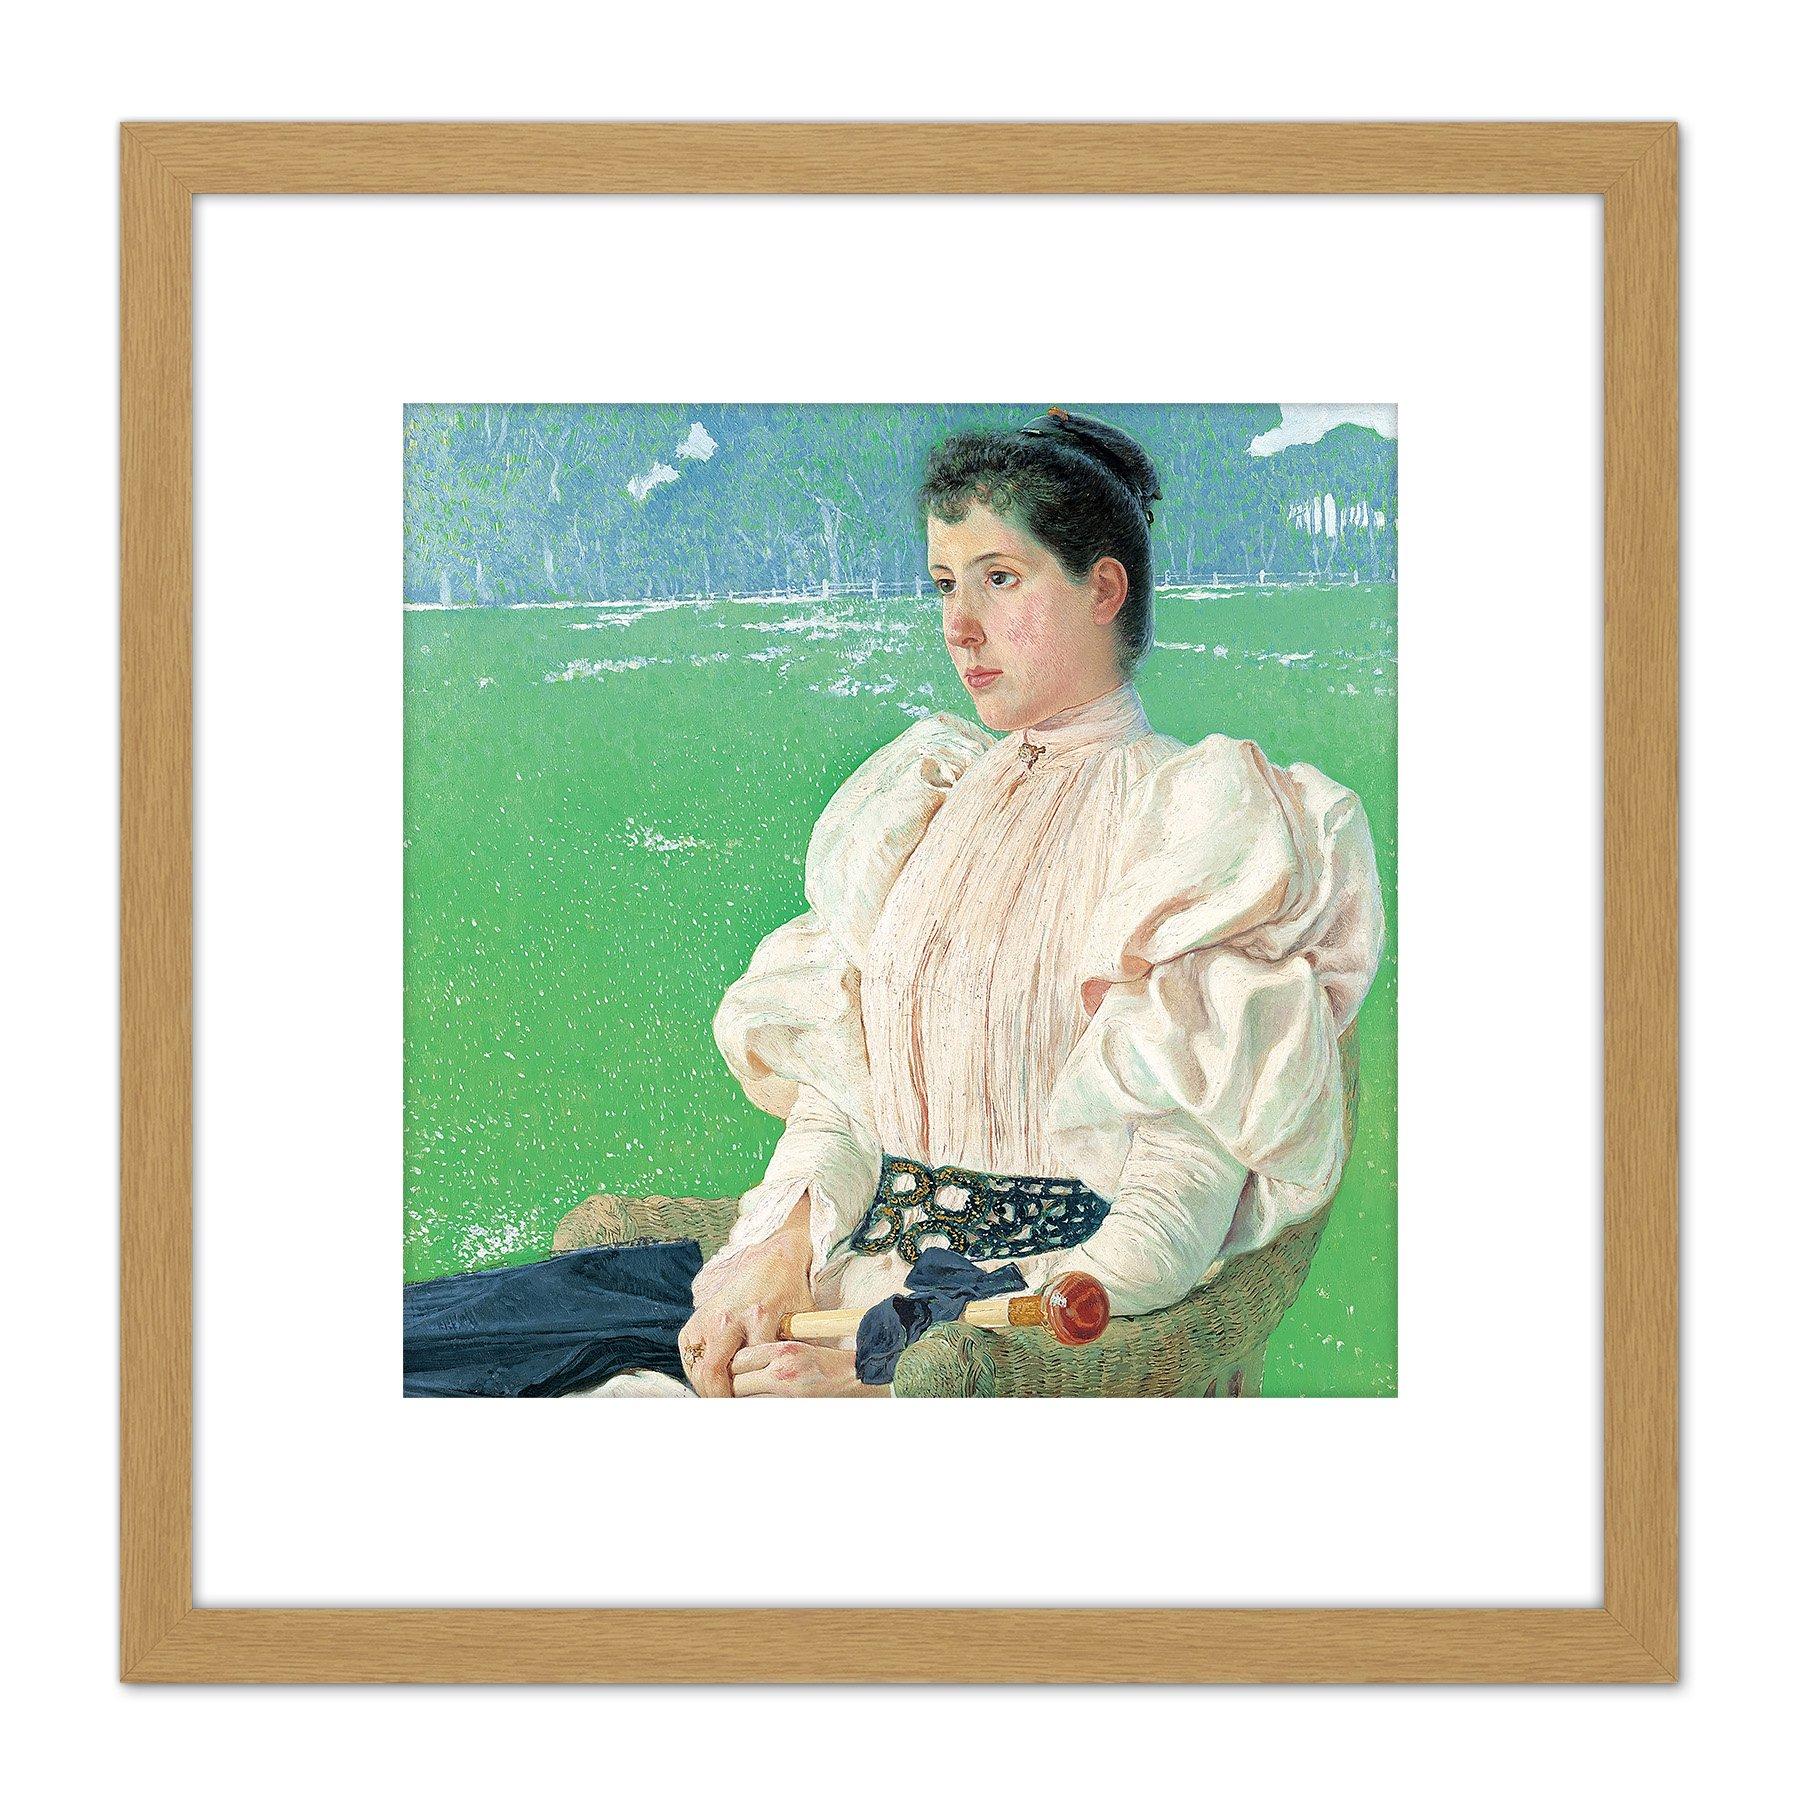 Anselmo Guinea Portrait Of A Lady Painting 8X8 Inch Square Wooden Framed Wall Art Print Picture with Mount